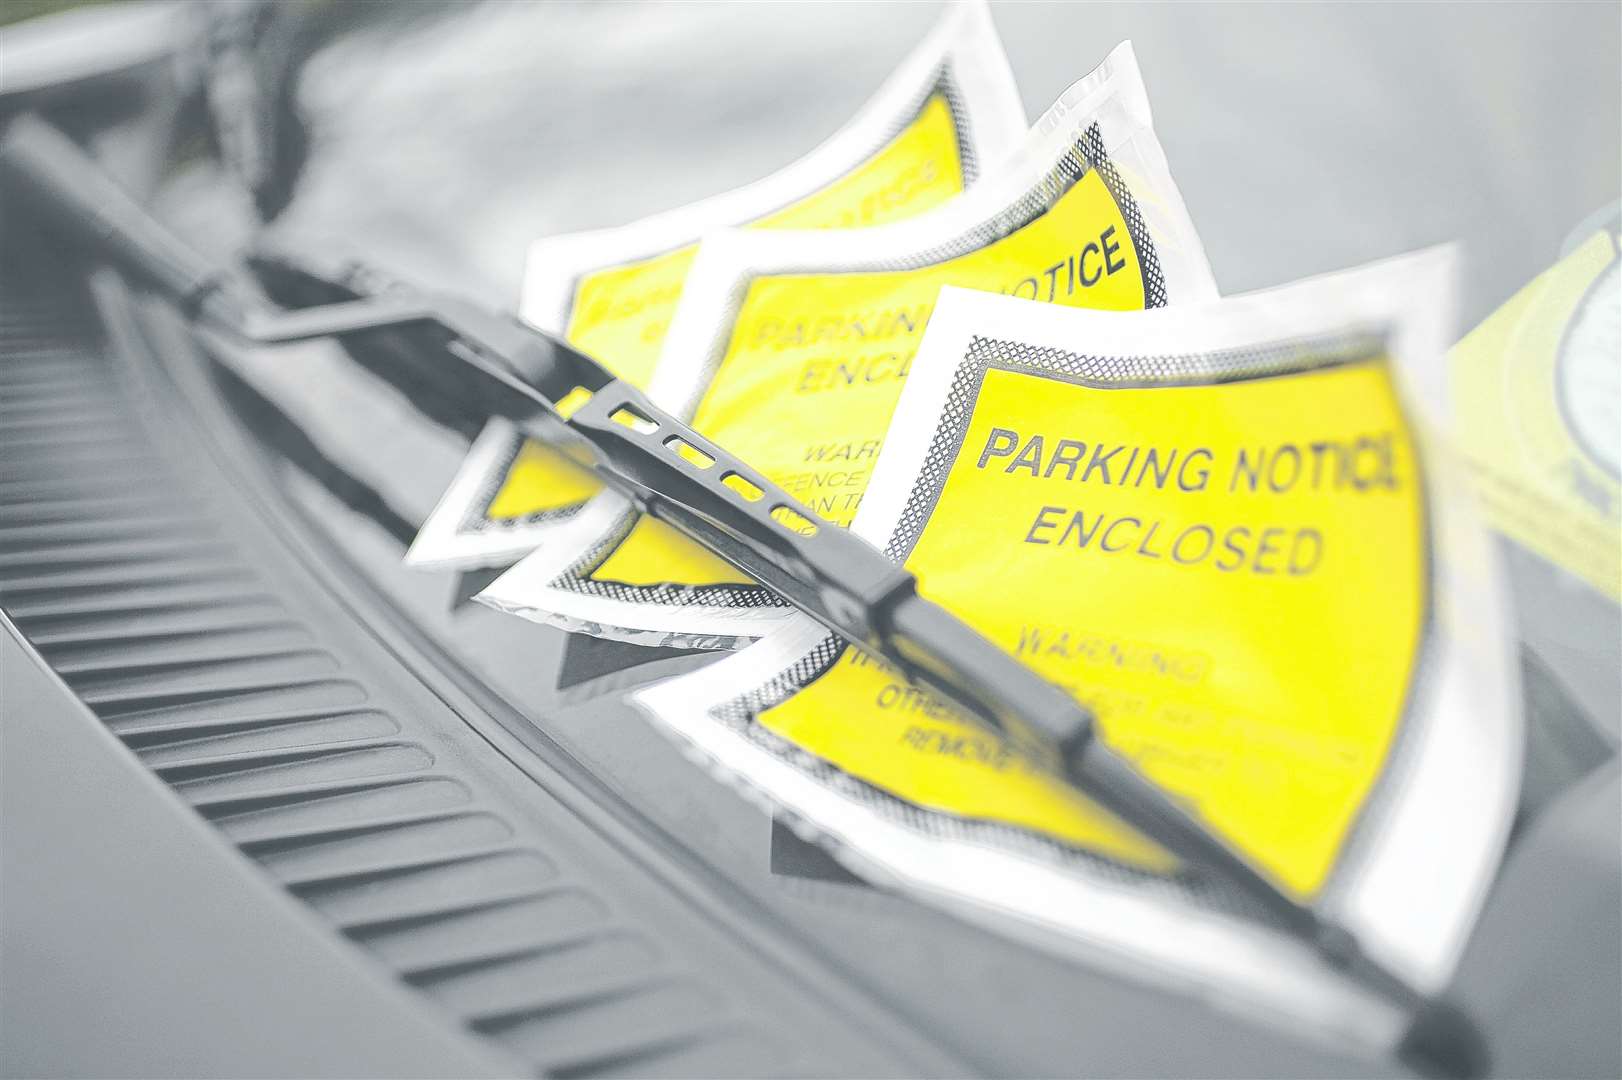 Stock image of parking charge notices